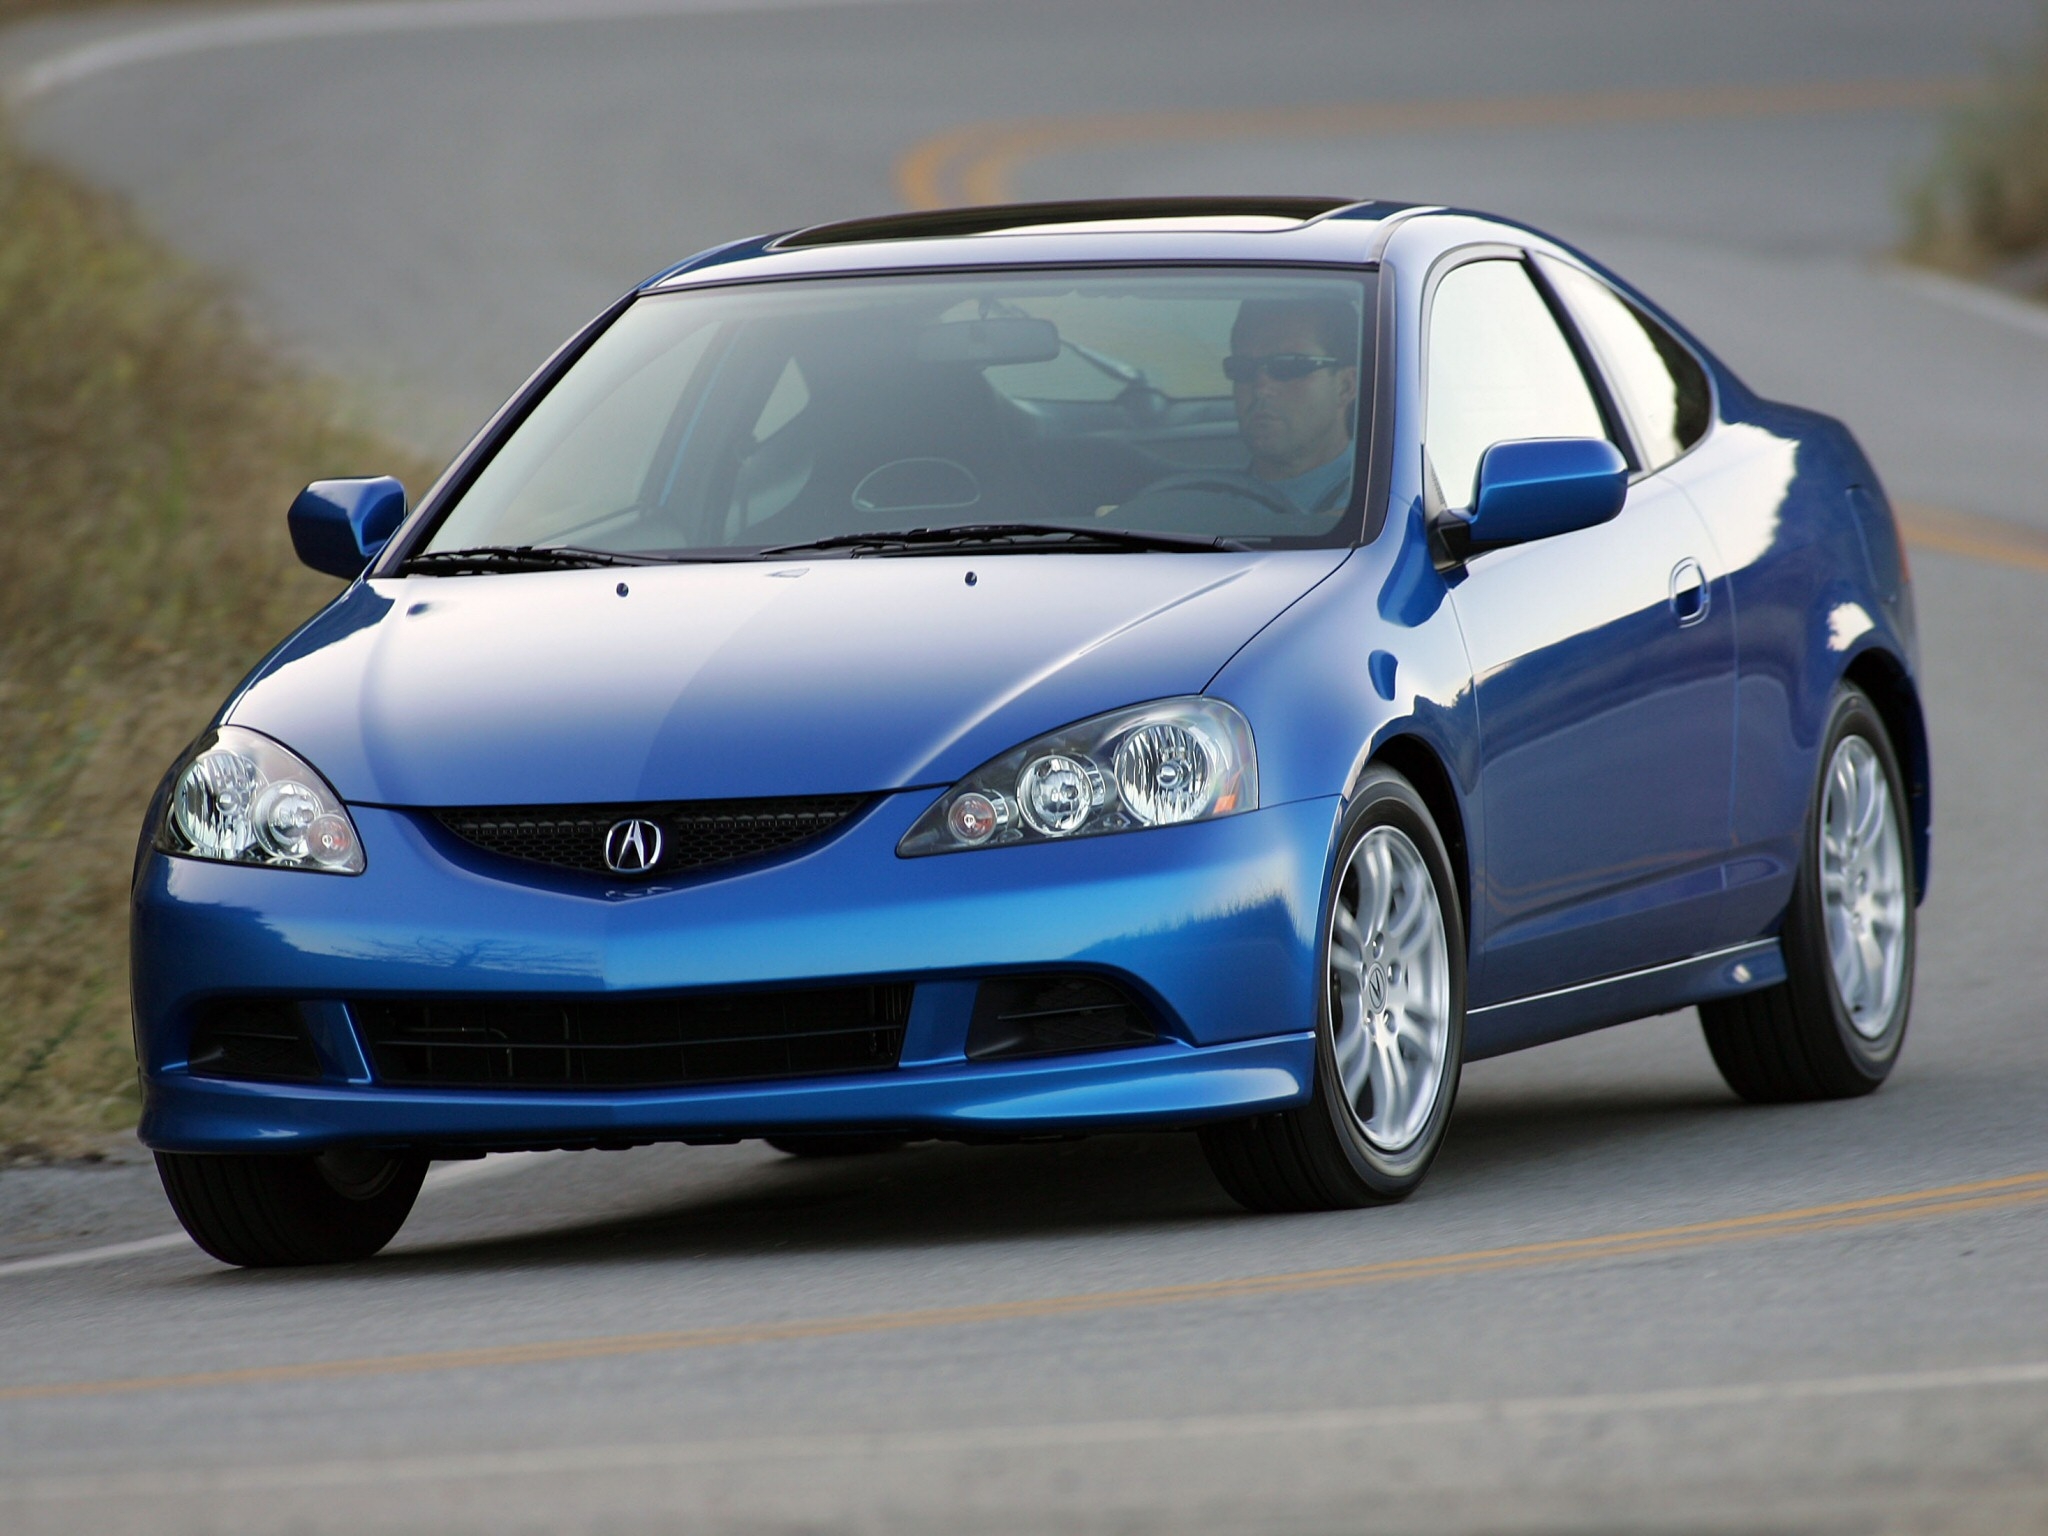 Download PC Wallpaper auto, acura, cars, blue, road, front view, style, rsx, 2005, akura